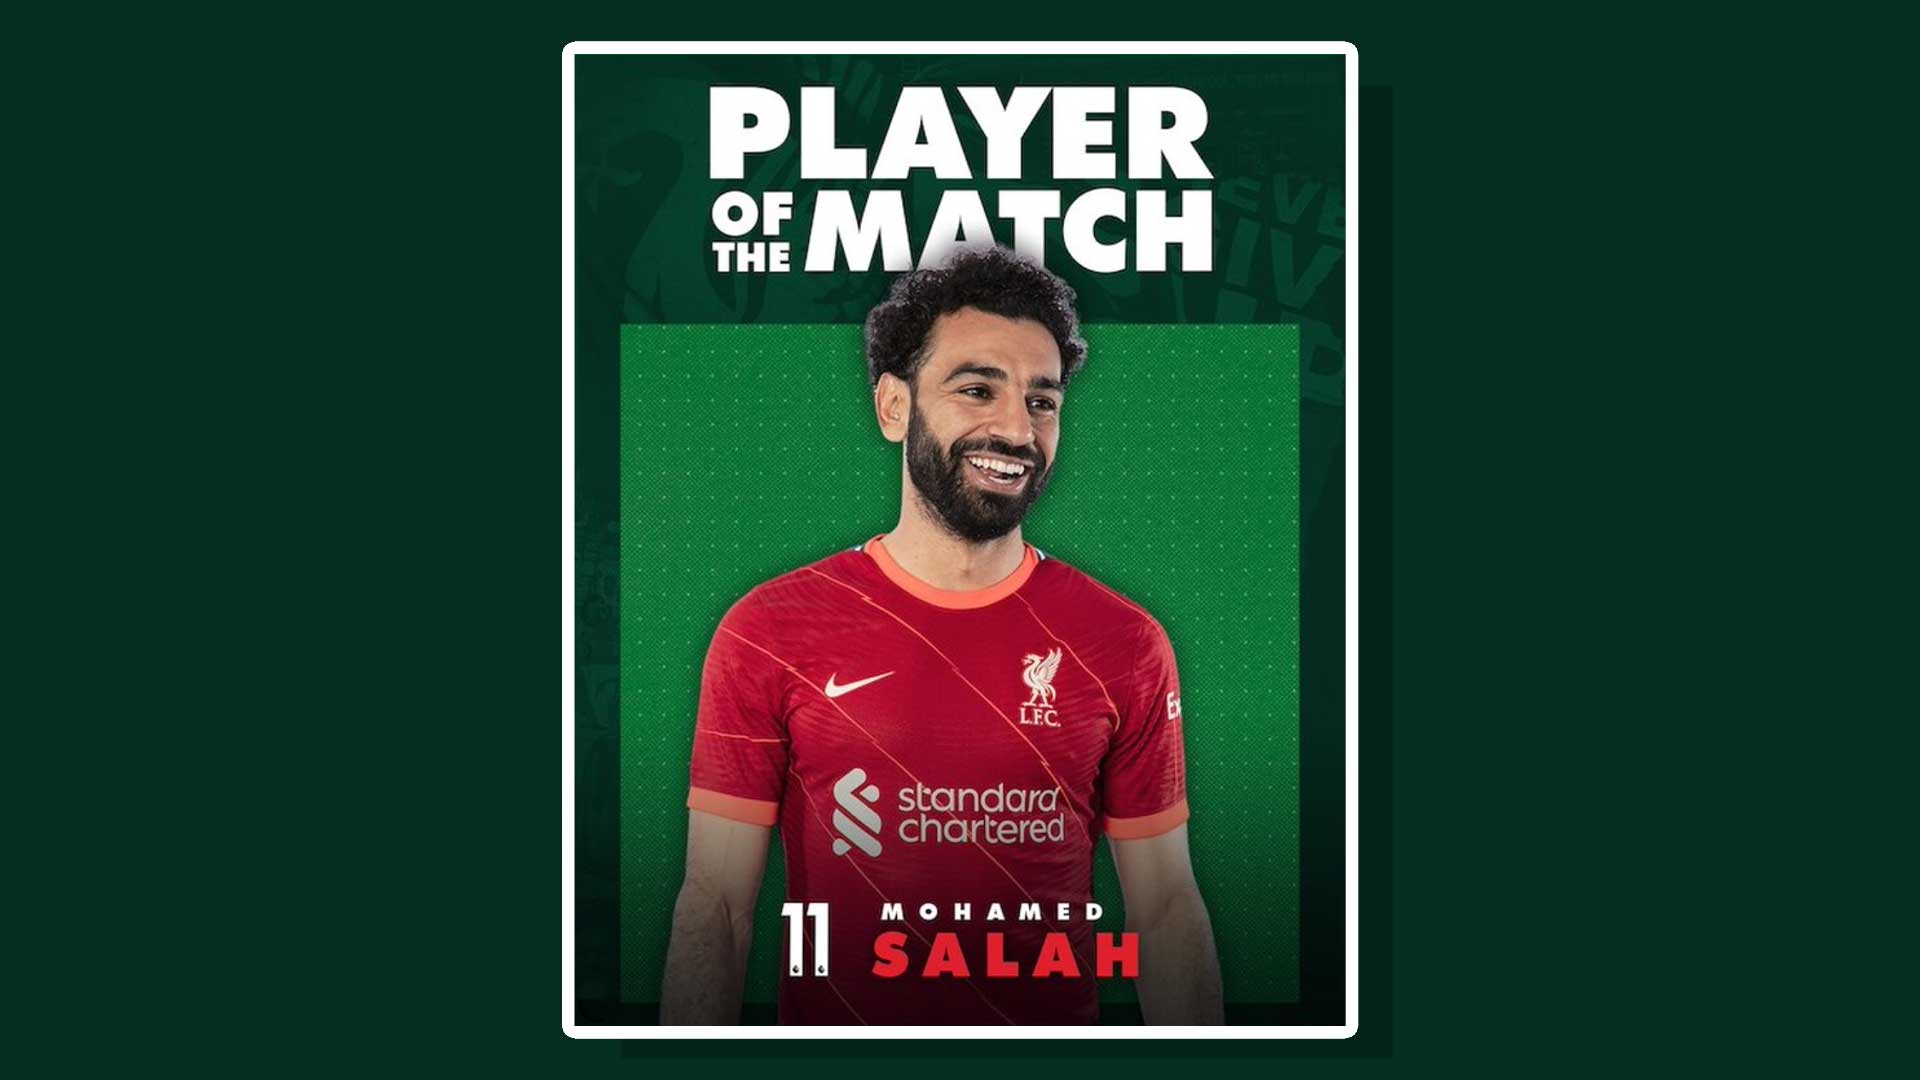 A player of the match image